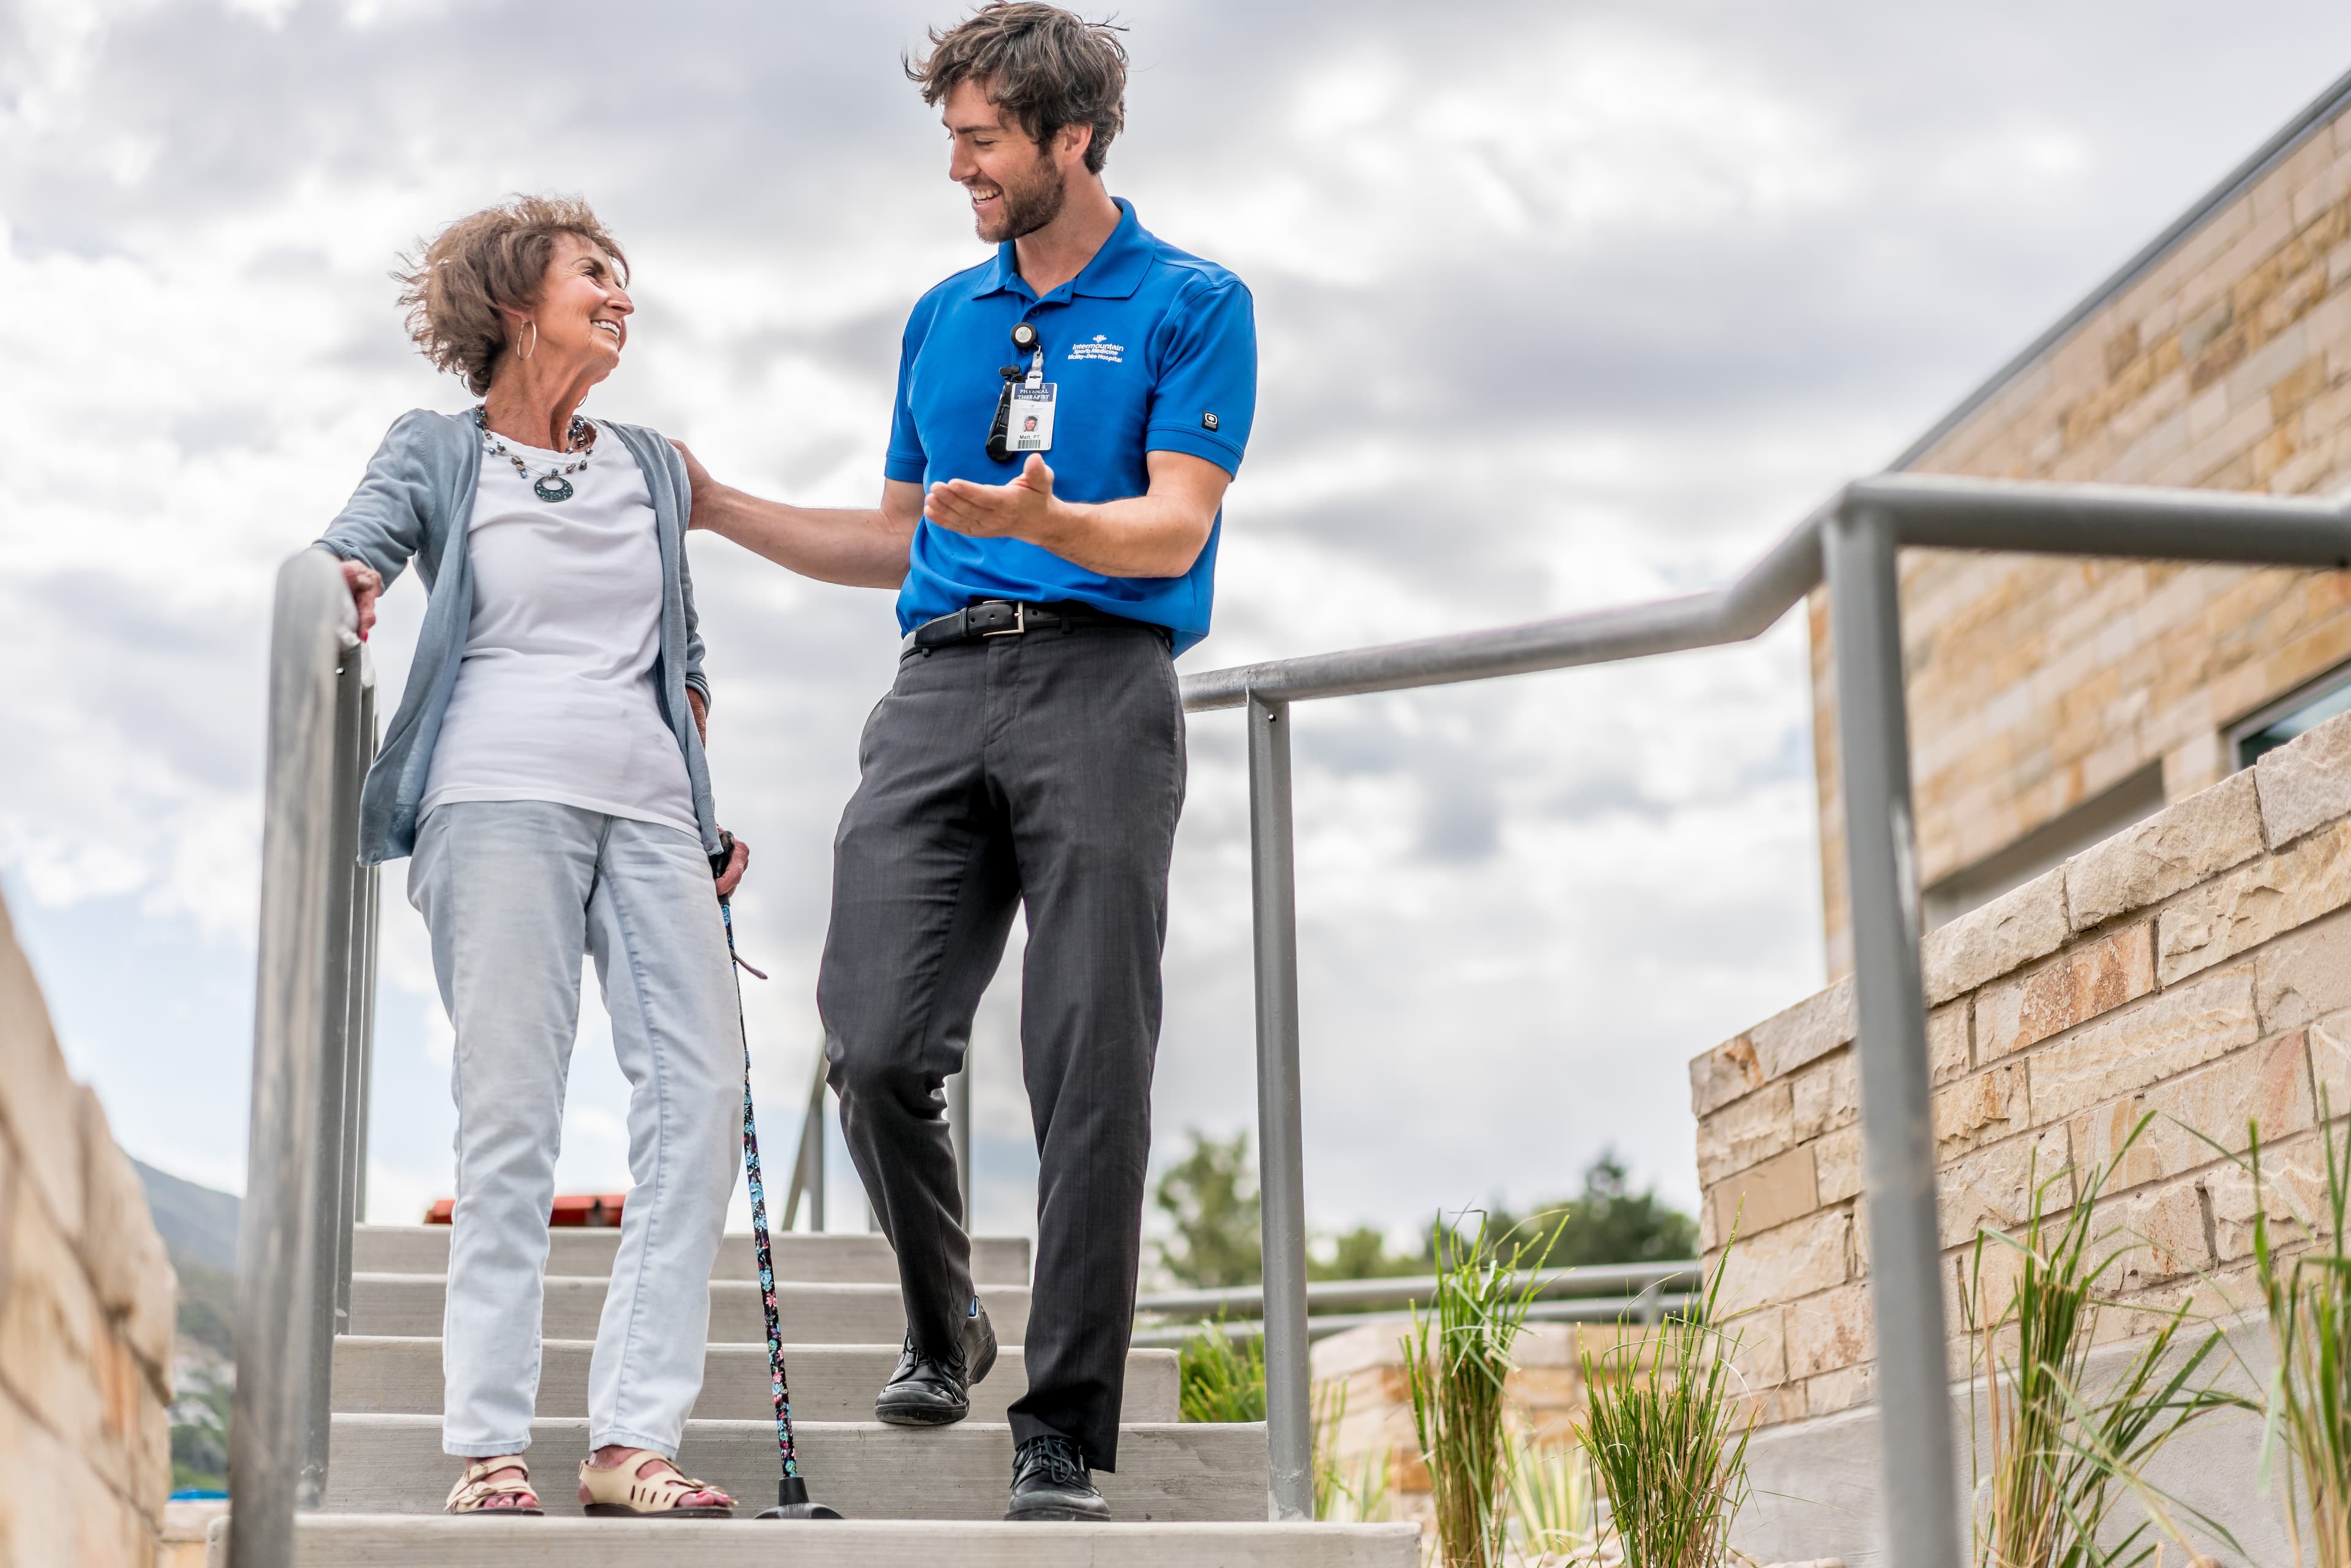 A caregiver helping a patient walk down a flight of stairs